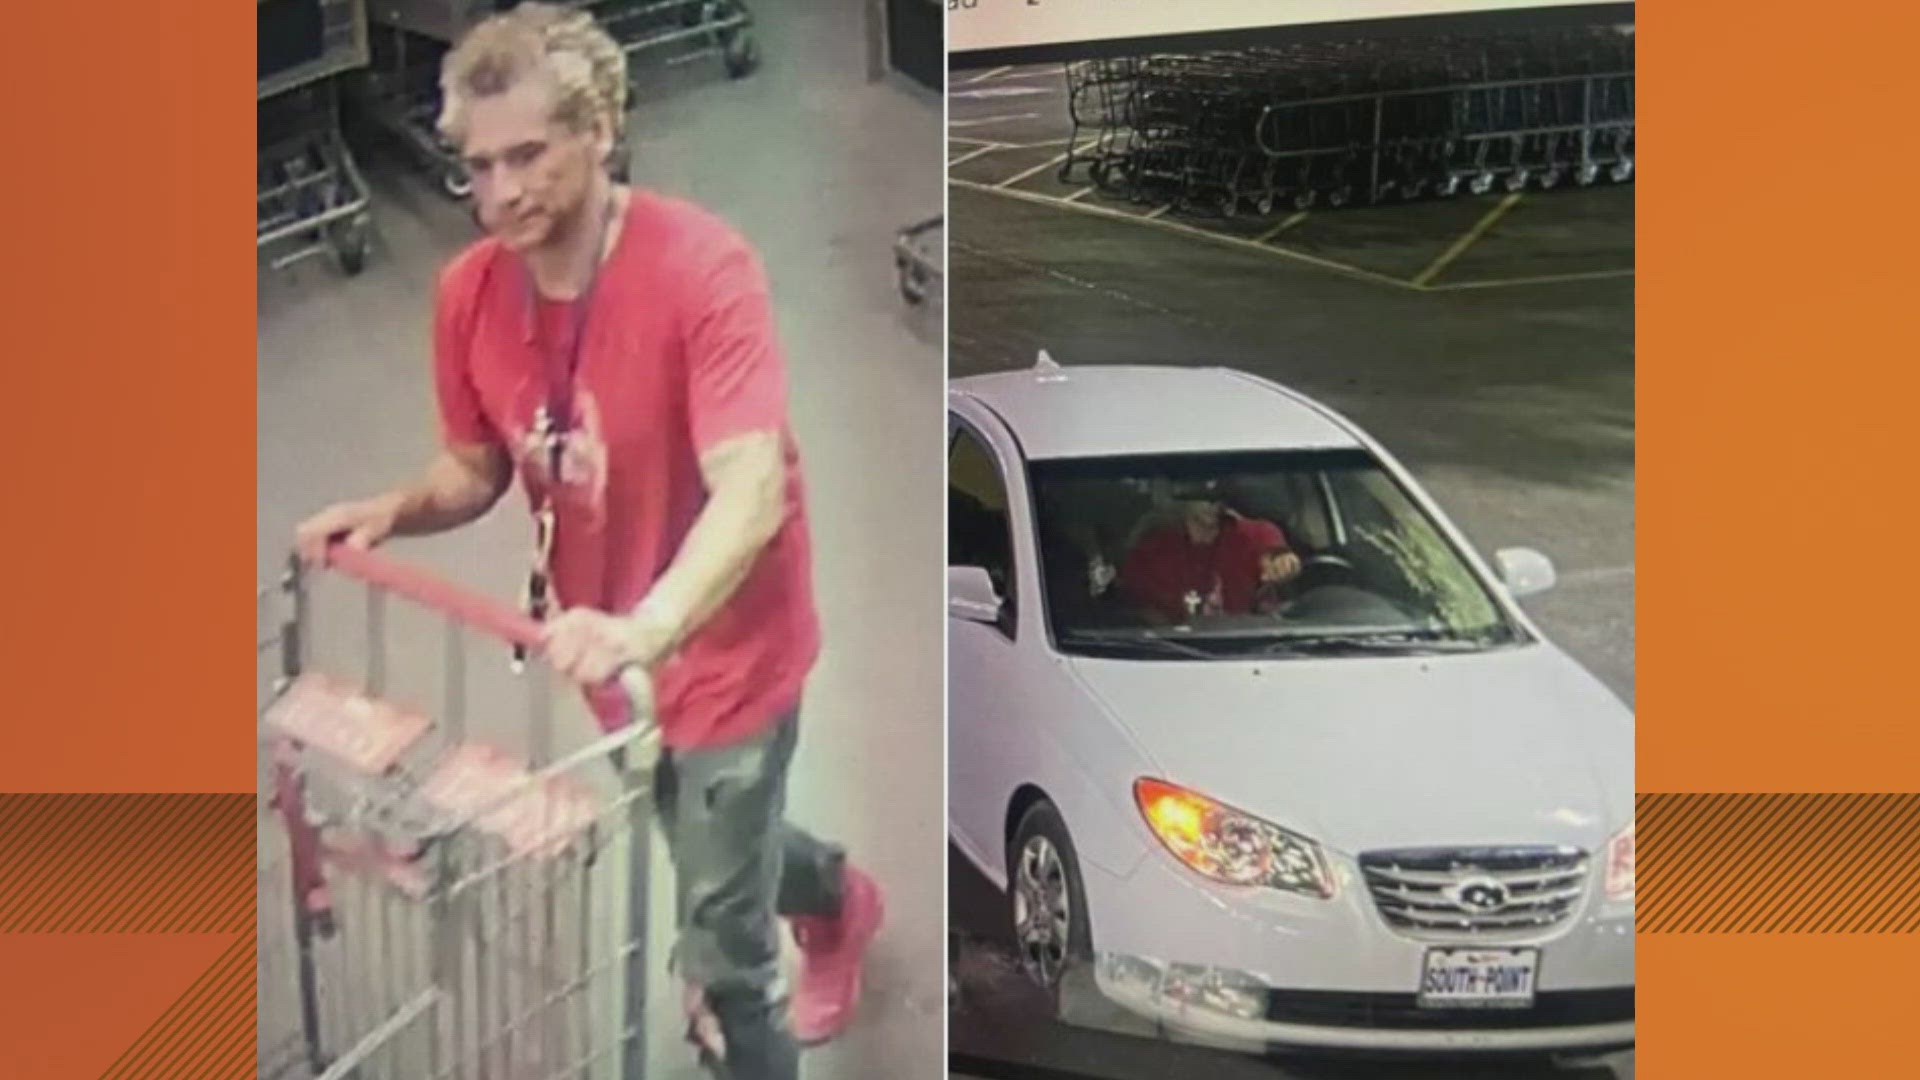 The suspect reportedly committed a retail theft June 28. Now, police are asking for the public's help in finding him.